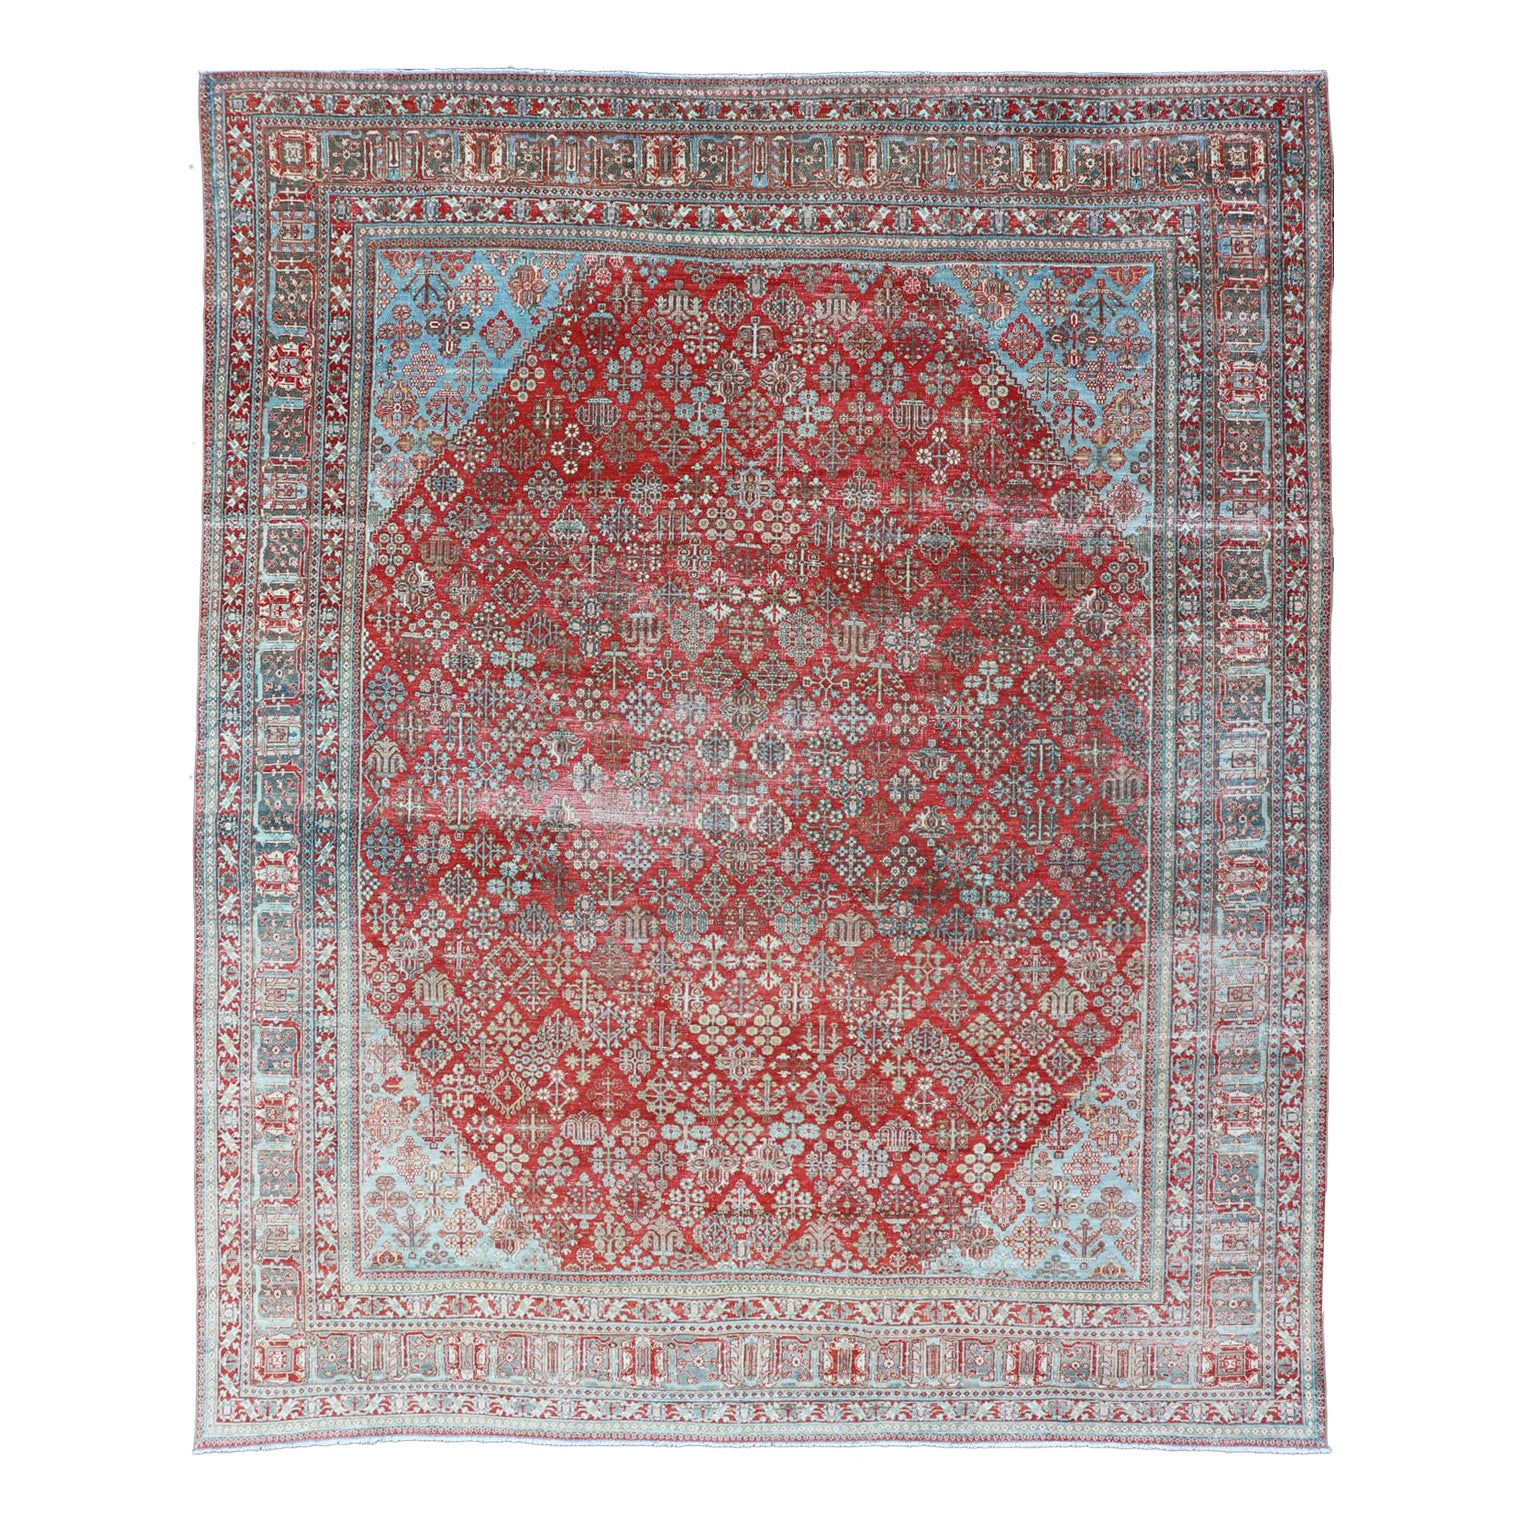 Antique Persian Joshegan Rug with Geometric Medallion Design in Red and Lt. Blue